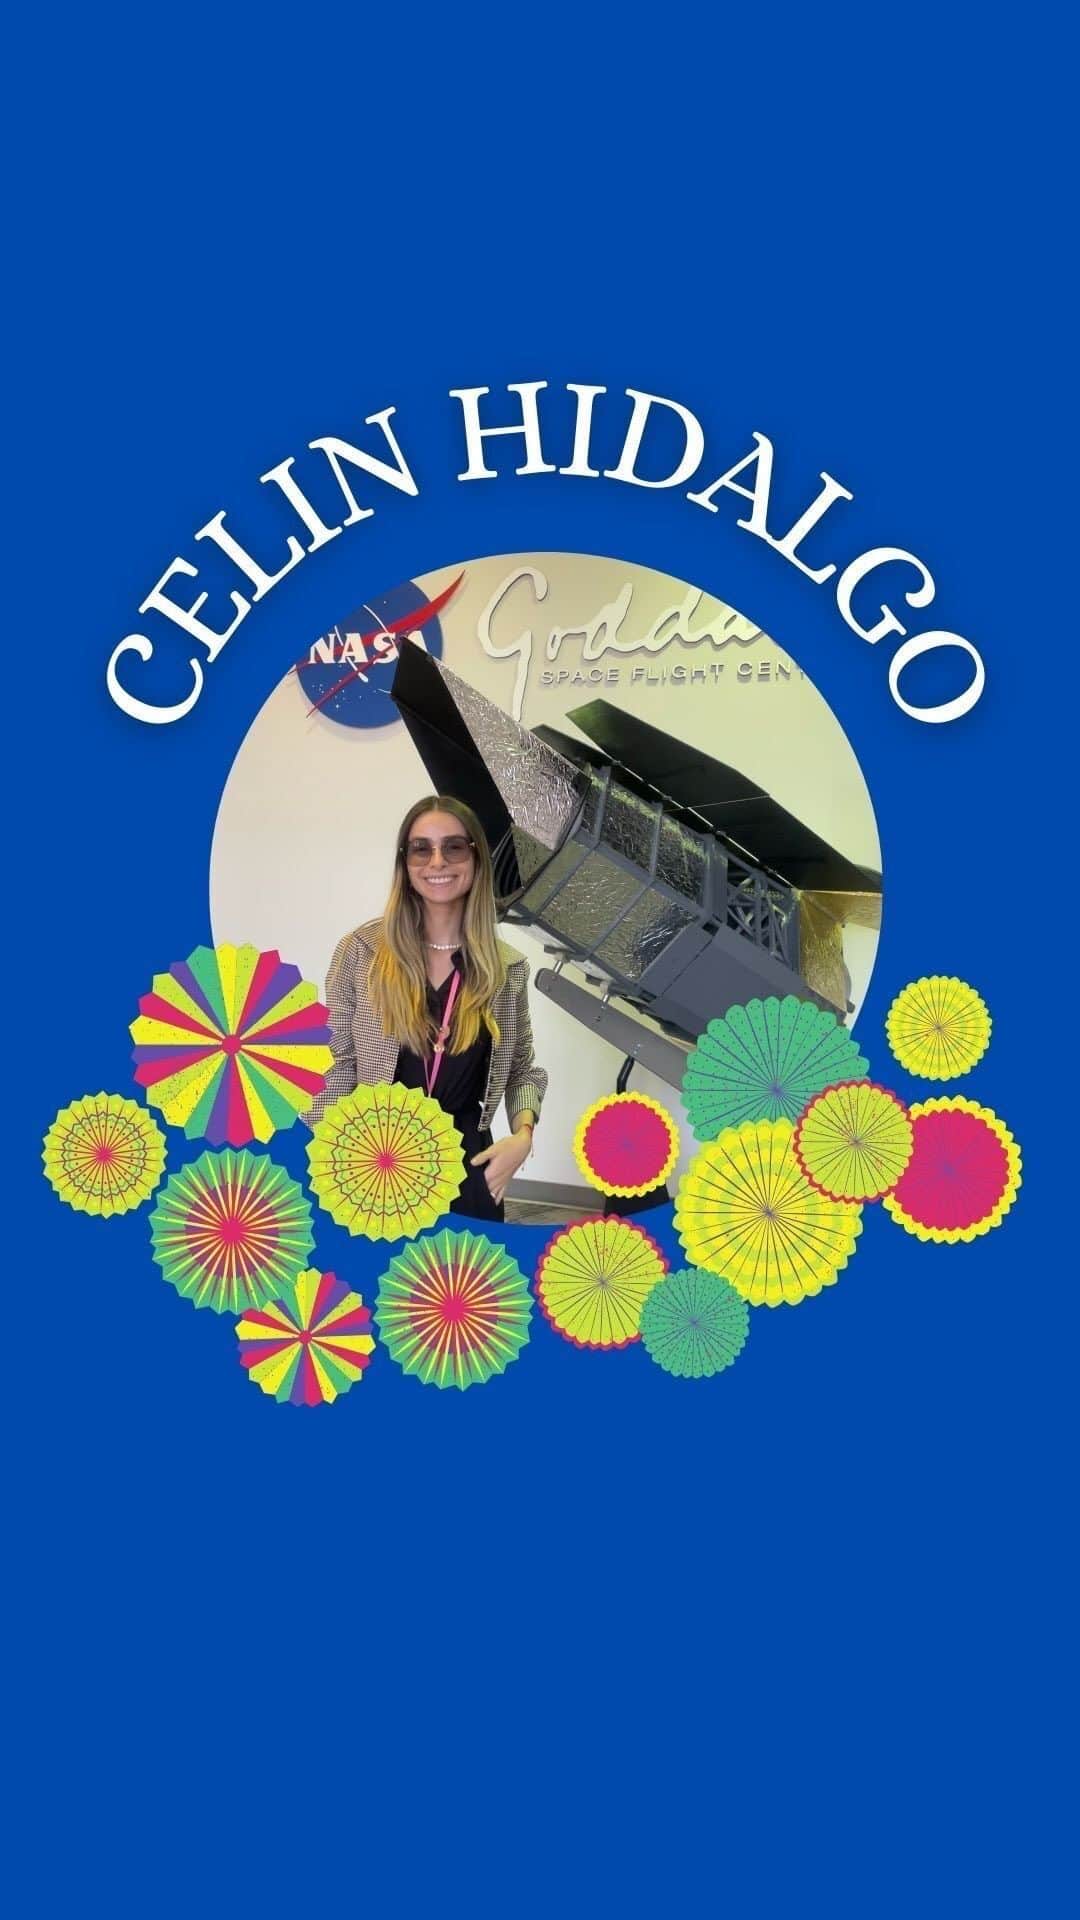 NASAのインスタグラム：「Meet Goddard intern Celin Hidalgo! 👋 In this installment of Conversations with Goddard, Celin talks about her role at Goddard and how important her contribution is in working with the @nasa_es team. She’s an intern and researcher but when she’s not working, you’ll find her traveling or solving the Wordle!   Read (and watch!) more #ConversationsWithGoddard at nasa.gov/goddard/people!  Video Description:  00:00 A animated graphic that reads “Celin Hidalgo and GSFC Intern” in the center and multicolored fans framing the name with a blue background. 00:05 A woman, Celin Hidalgo, with glasses and light brown hair appears wearing a blue sweater with a NASA pin. She’s holding a microphone as she speaks. 00:18 An image of Celin appears as she’s speaking. In the image, she’s posing in front of the Nancy Grace Roman Space Telescope Model. 00:19 Celin stands in front of a green screen in a studio while a camera is aimed at her. She’s wearing a blue NASA Goddard collard shirt and black pants. 00:21 A selfie of Celin posing in front of the NASA logo. She’s wearing a NASA blue collared shirt and her lanyard is decorated with NASA themed pins. 00:22 Two images appear of Celin on the top and bottom of the screen. On the top, Celin is wearing a black blazer with a white shirt. She’s taking a selfie with astronaut Nicole A. Mann. Nicole A. Mann is wearing a blue jumpsuit that’s decorated with NASA mission badges. On the bottom image, Celin’s wearing a black shirt and sitting in a podcasting studio. 00:24 Back to Celin talking. 00:38 Another image of Celin wearing white and posing at NASA headquarters. 00:41 Back to Celin talking. 00:47 The video fades to black.」